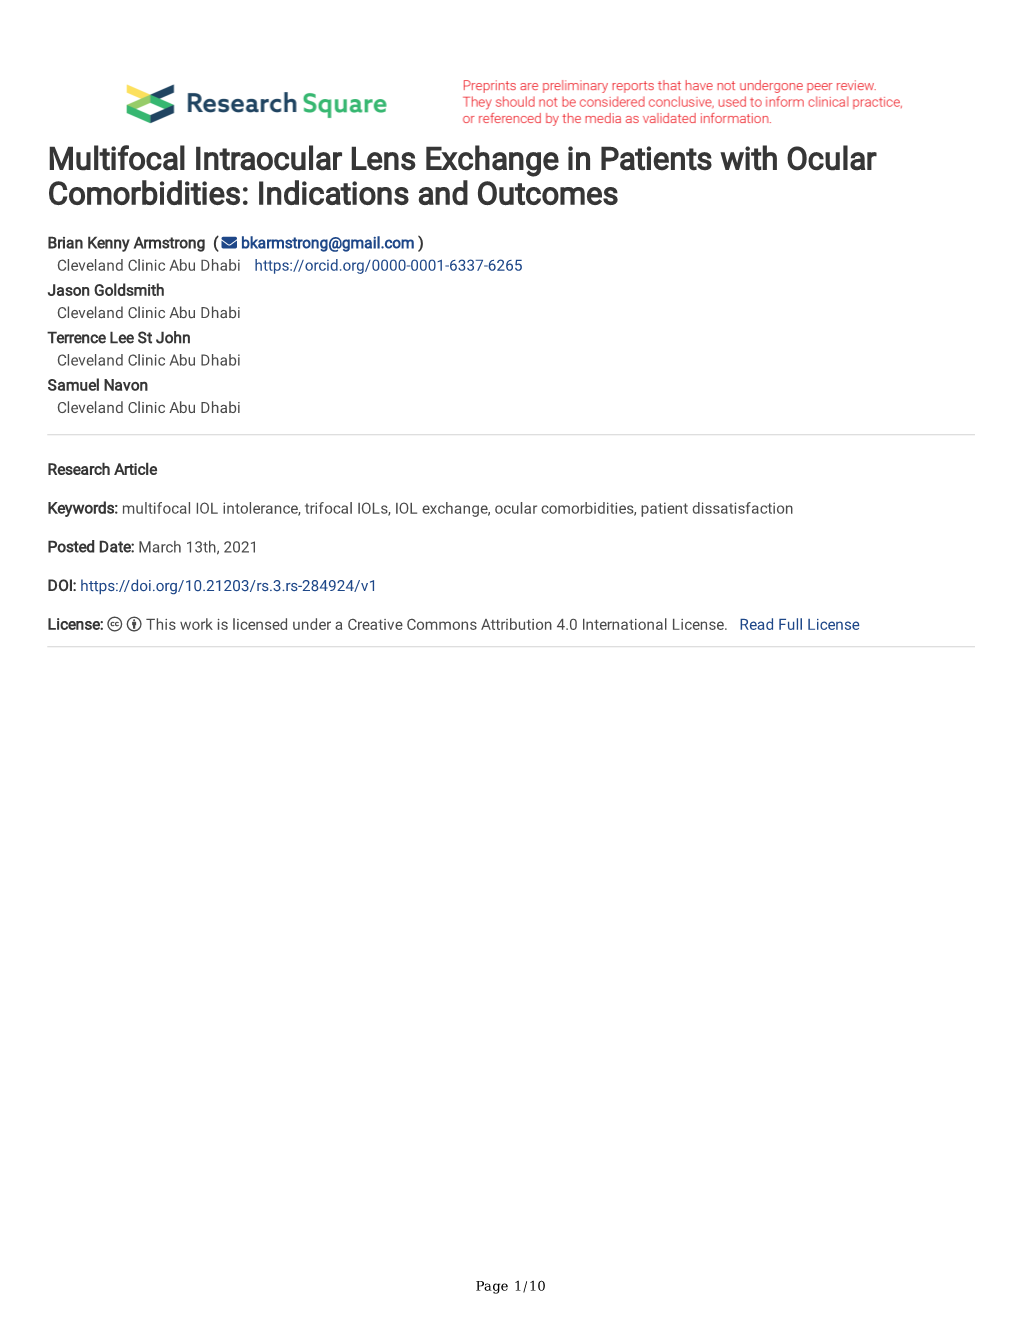 Multifocal Intraocular Lens Exchange in Patients with Ocular Comorbidities: Indications and Outcomes